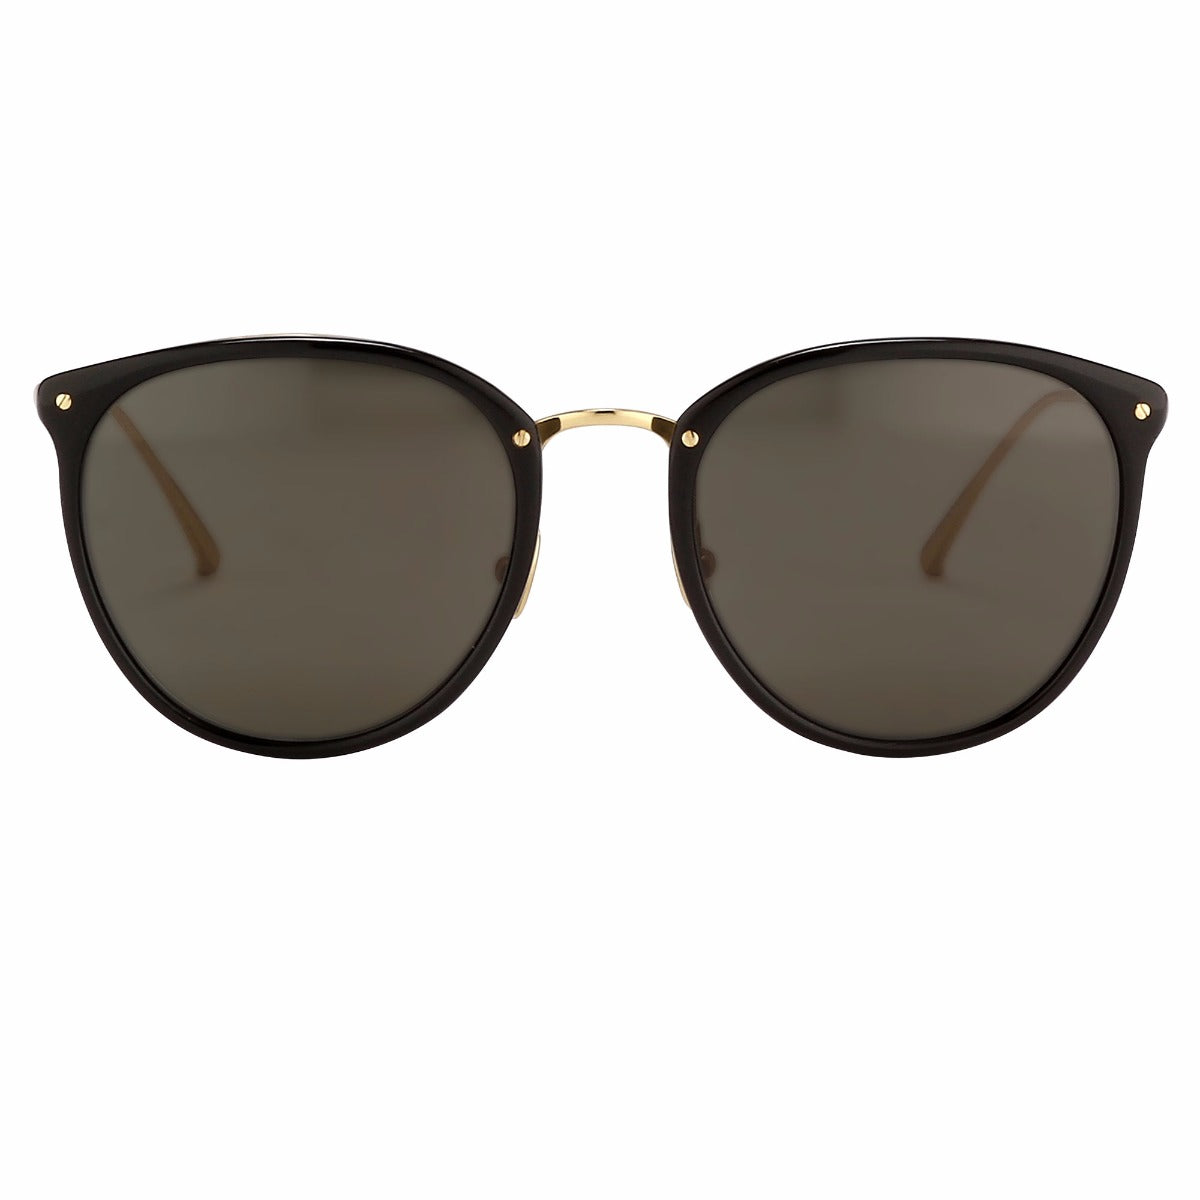 The Calthorpe Oval Sunglasses in Black Frame (C86)